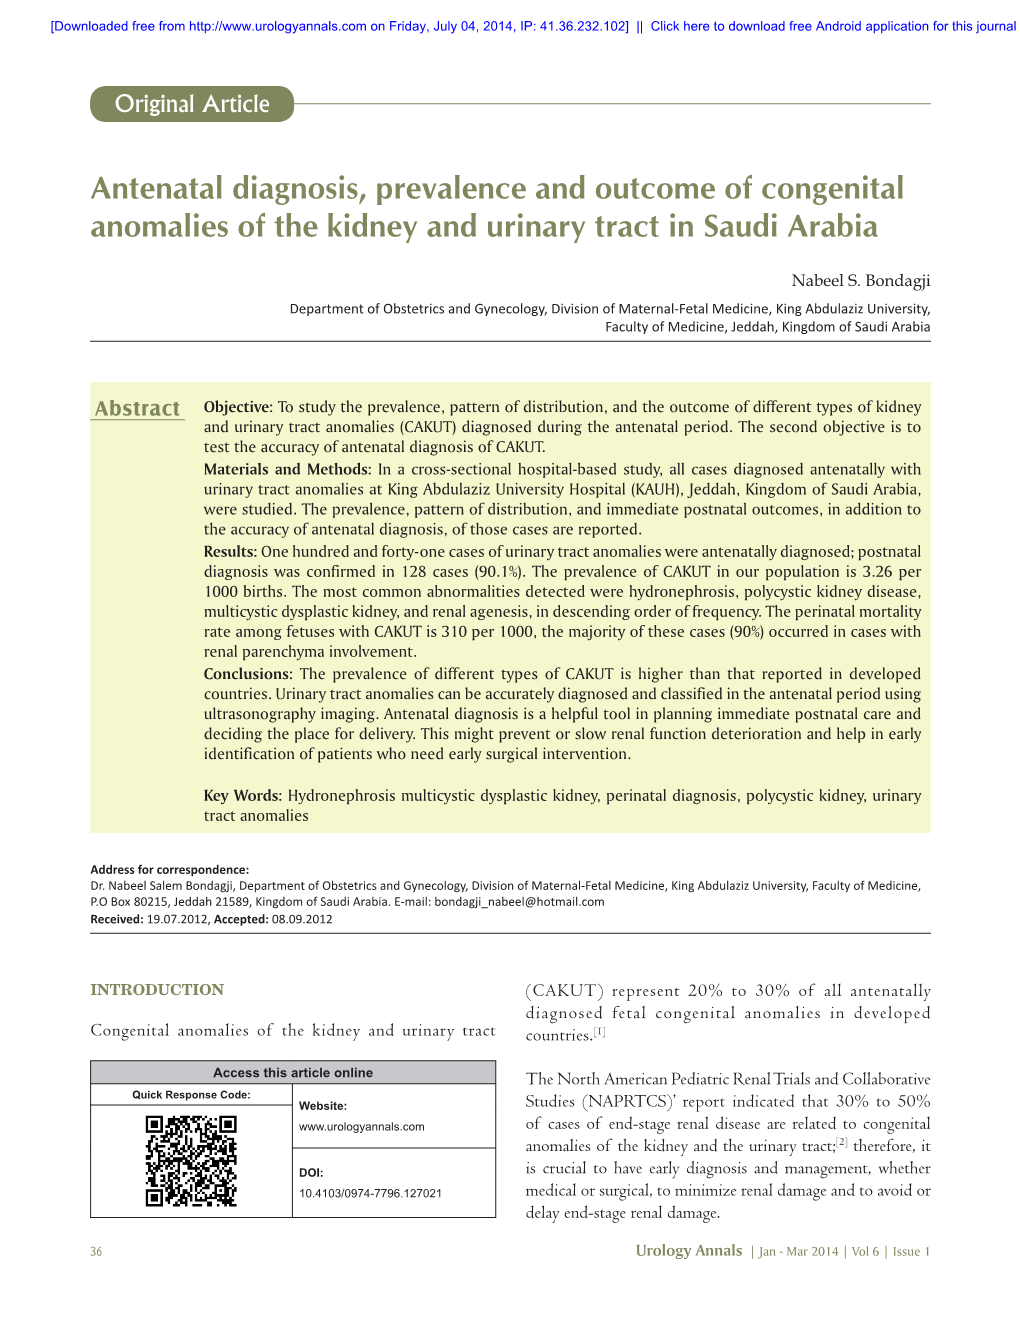 Antenatal Diagnosis, Prevalence and Outcome of Congenital Anomalies of the Kidney and Urinary Tract in Saudi Arabia